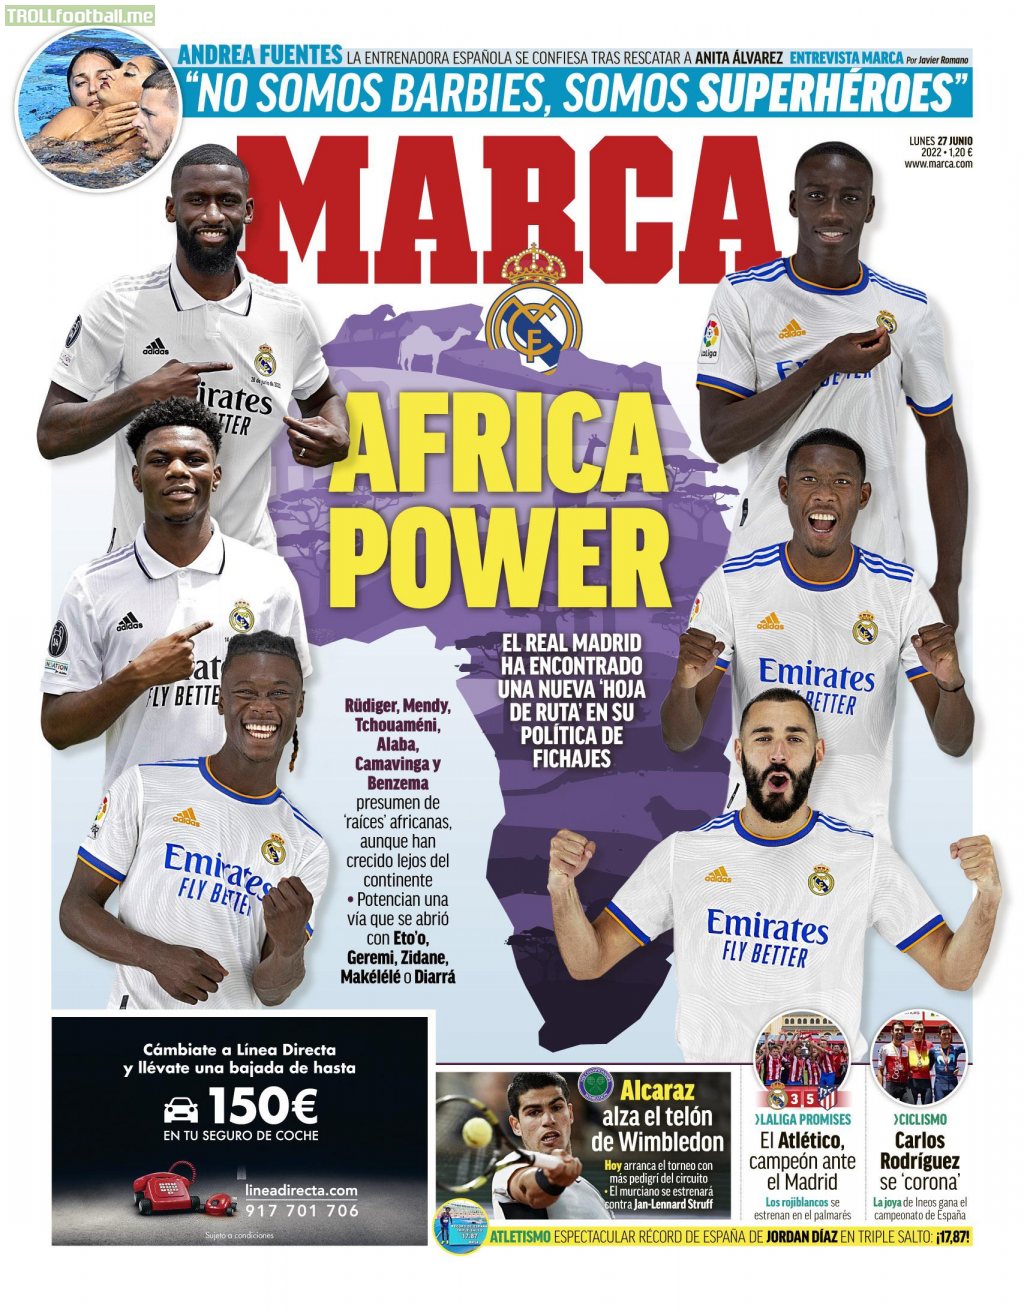 Marca’s front page for tomorrow (27th June), titled “Africa Power” with a picture of 7 Real Madrid players.